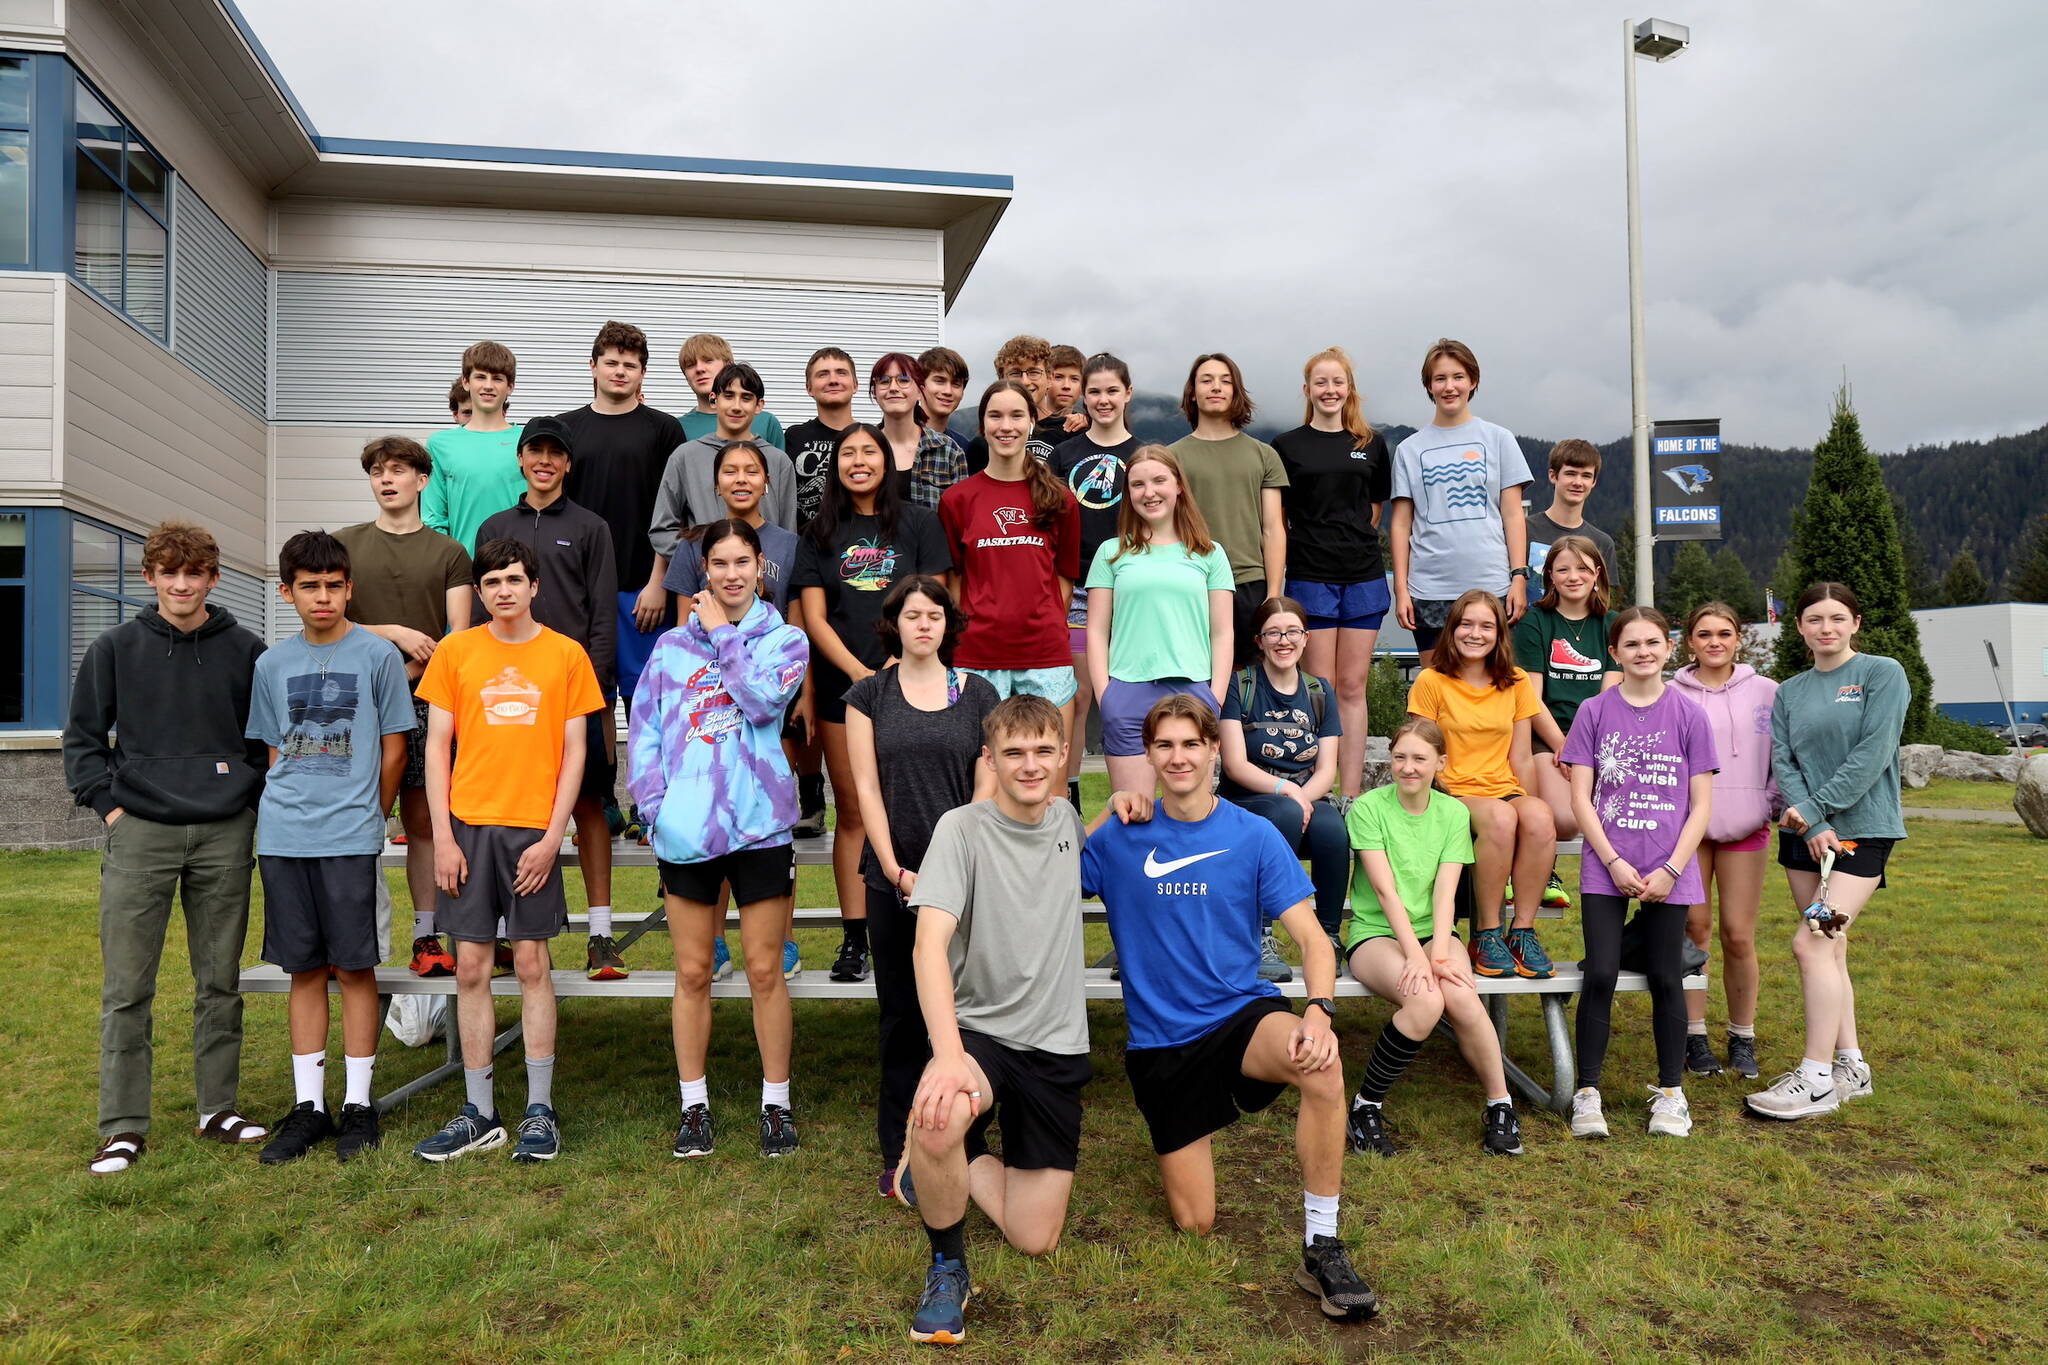 The Thunder Mountain High School cross-country team pose for a photo before their practice began outside of the high school Thursday evening. (Clarise Larson / Juneau Empire)